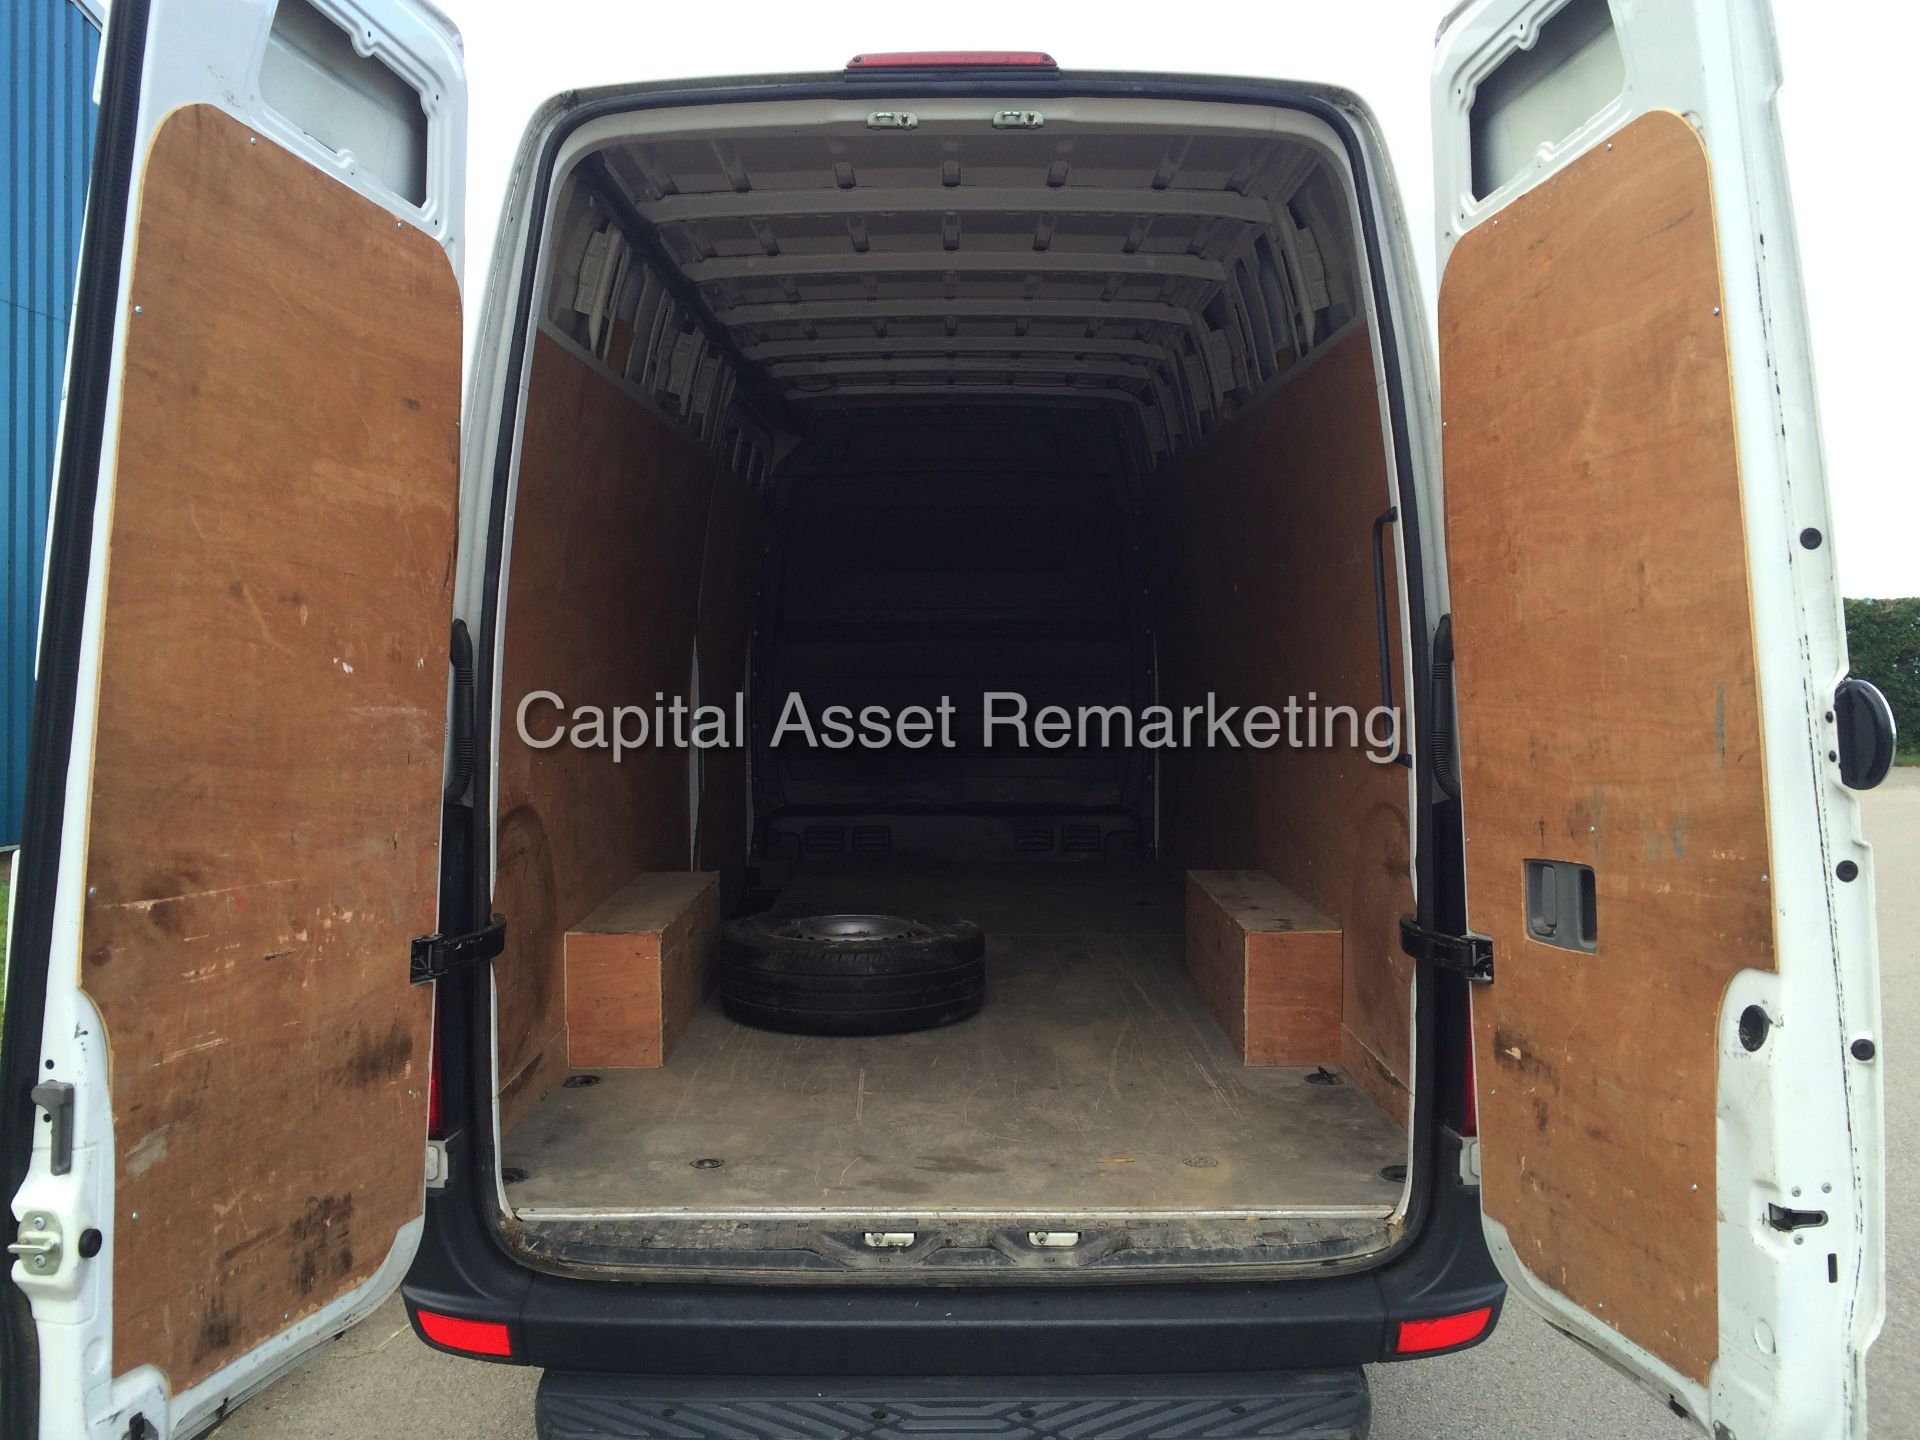 VOLKSWAGEN CRAFTER 2.0Ltr TDI CR35 LWB (2014 MODEL) NEW SHAPE - CRUISE CONTROL - 1 OWNER FROM NEW !! - Image 19 of 19